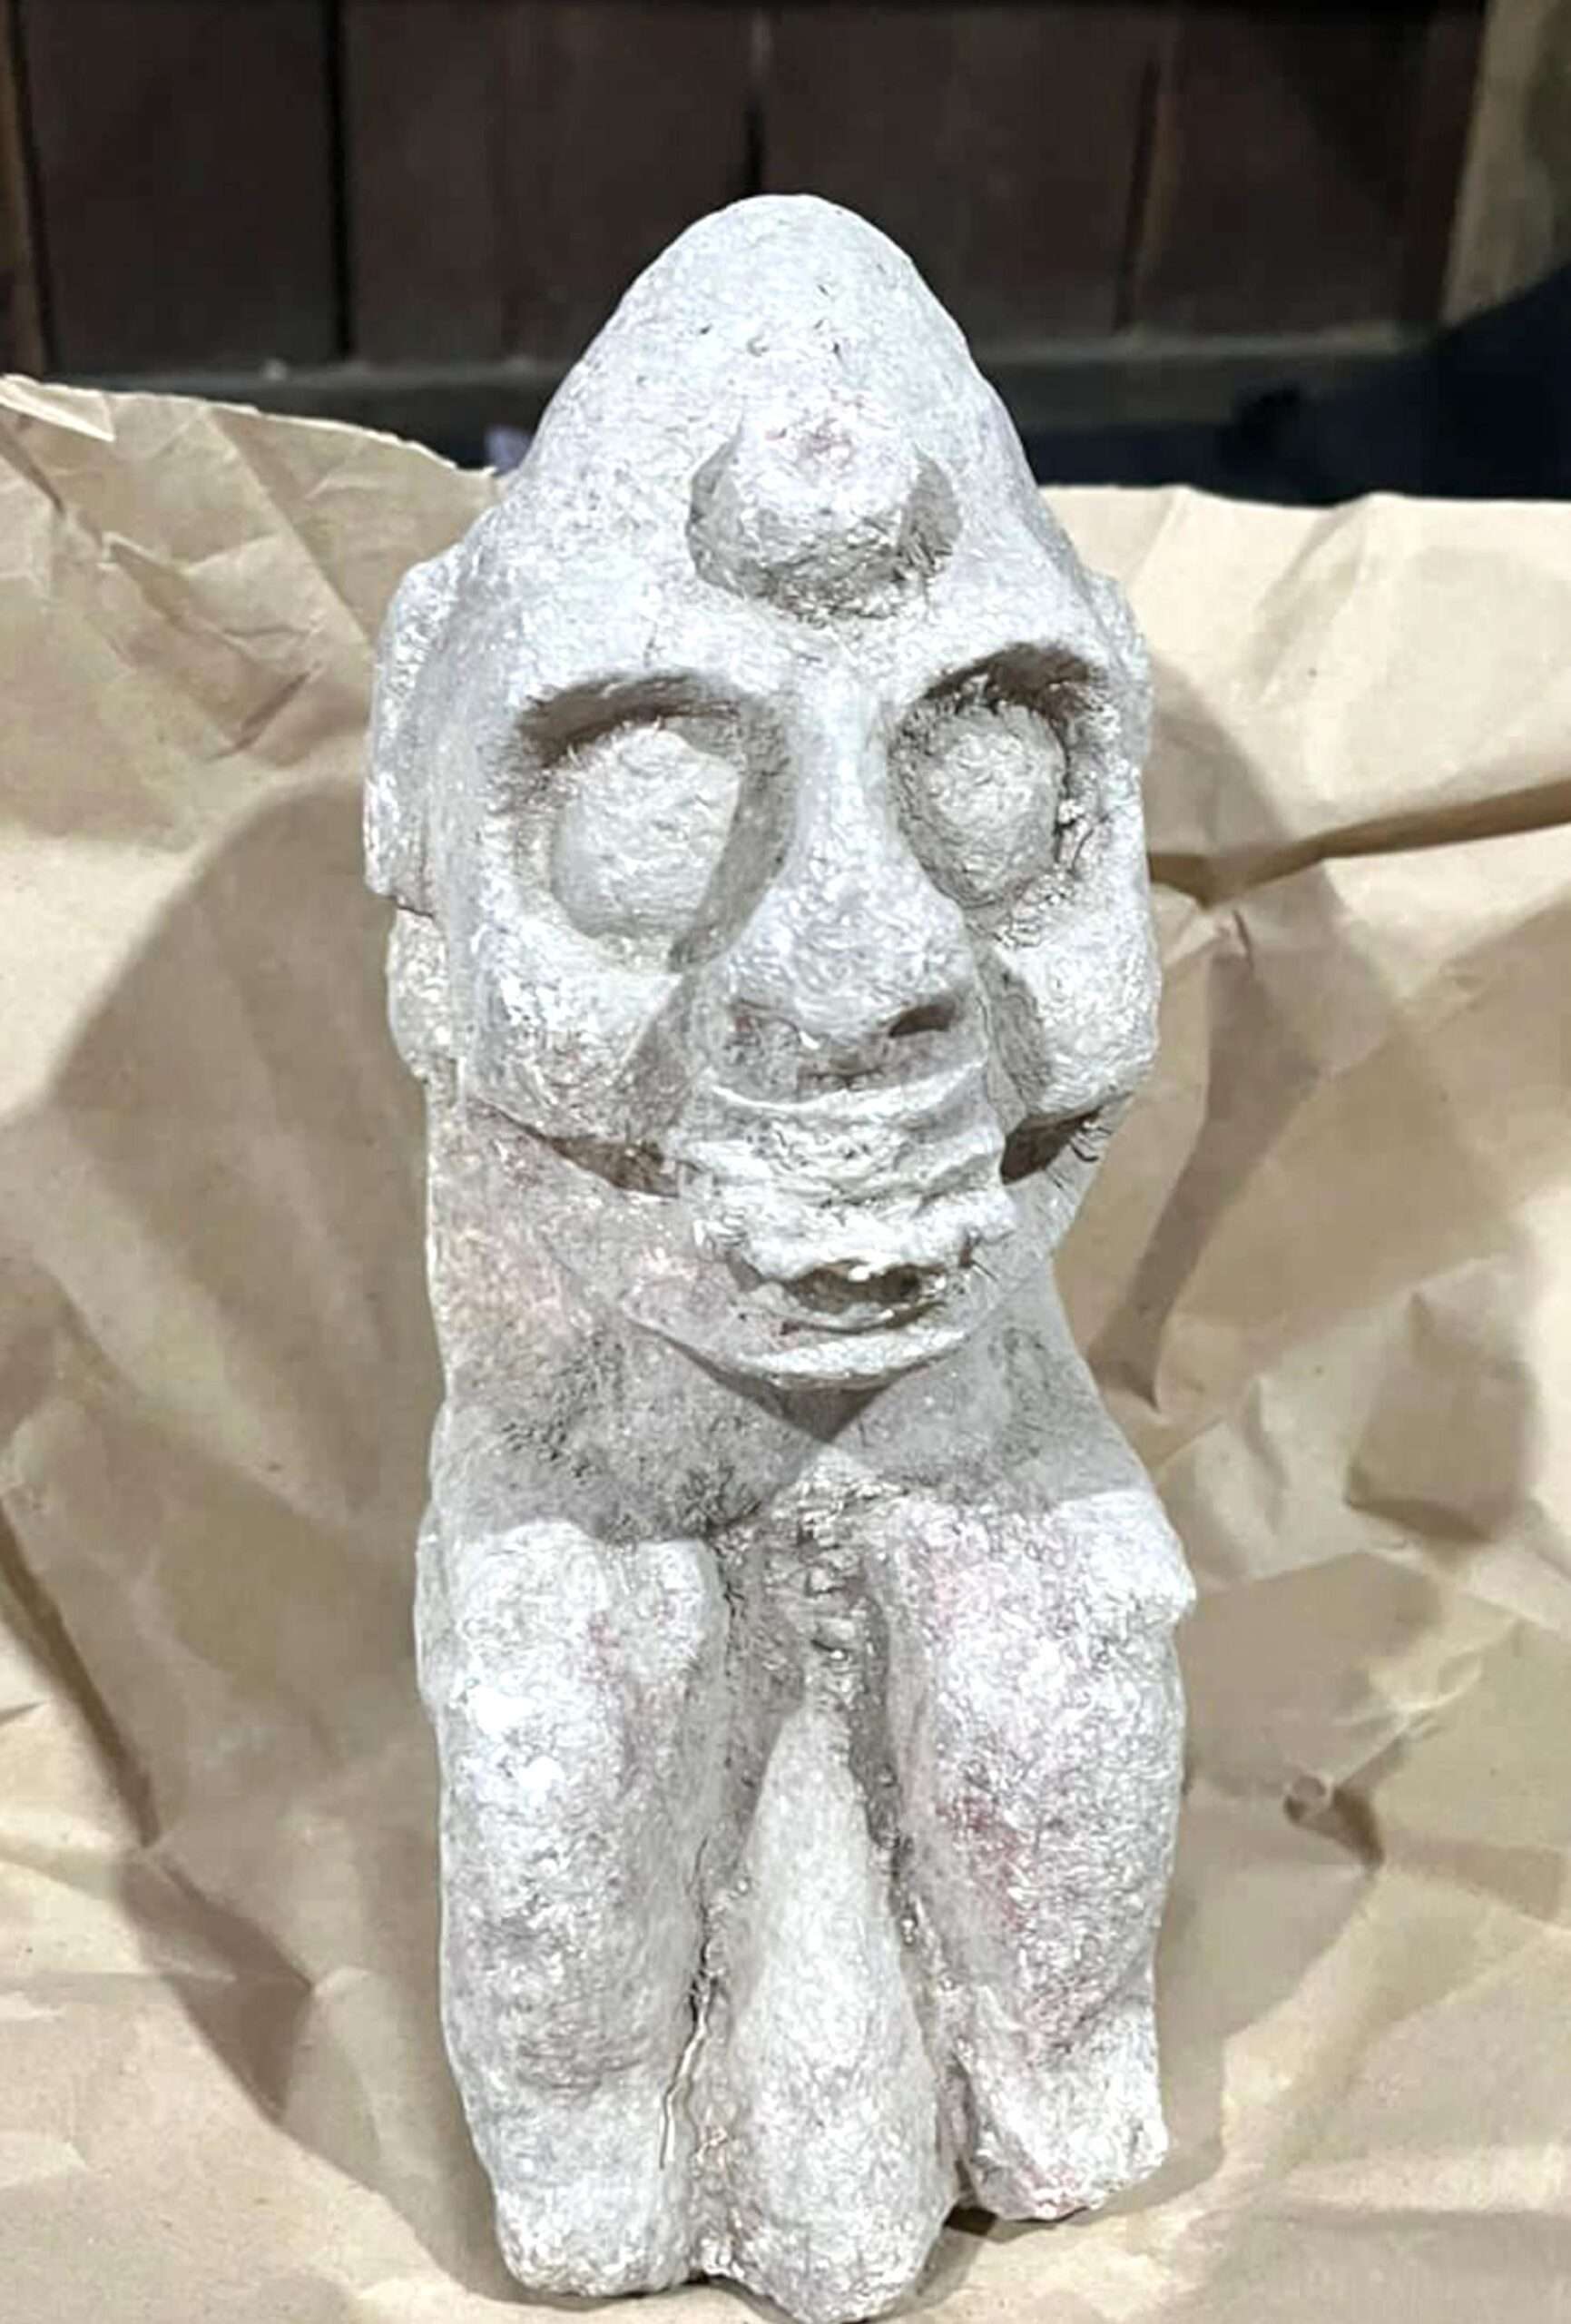 Pointy-Headed Ancient God Of Death Unearthed